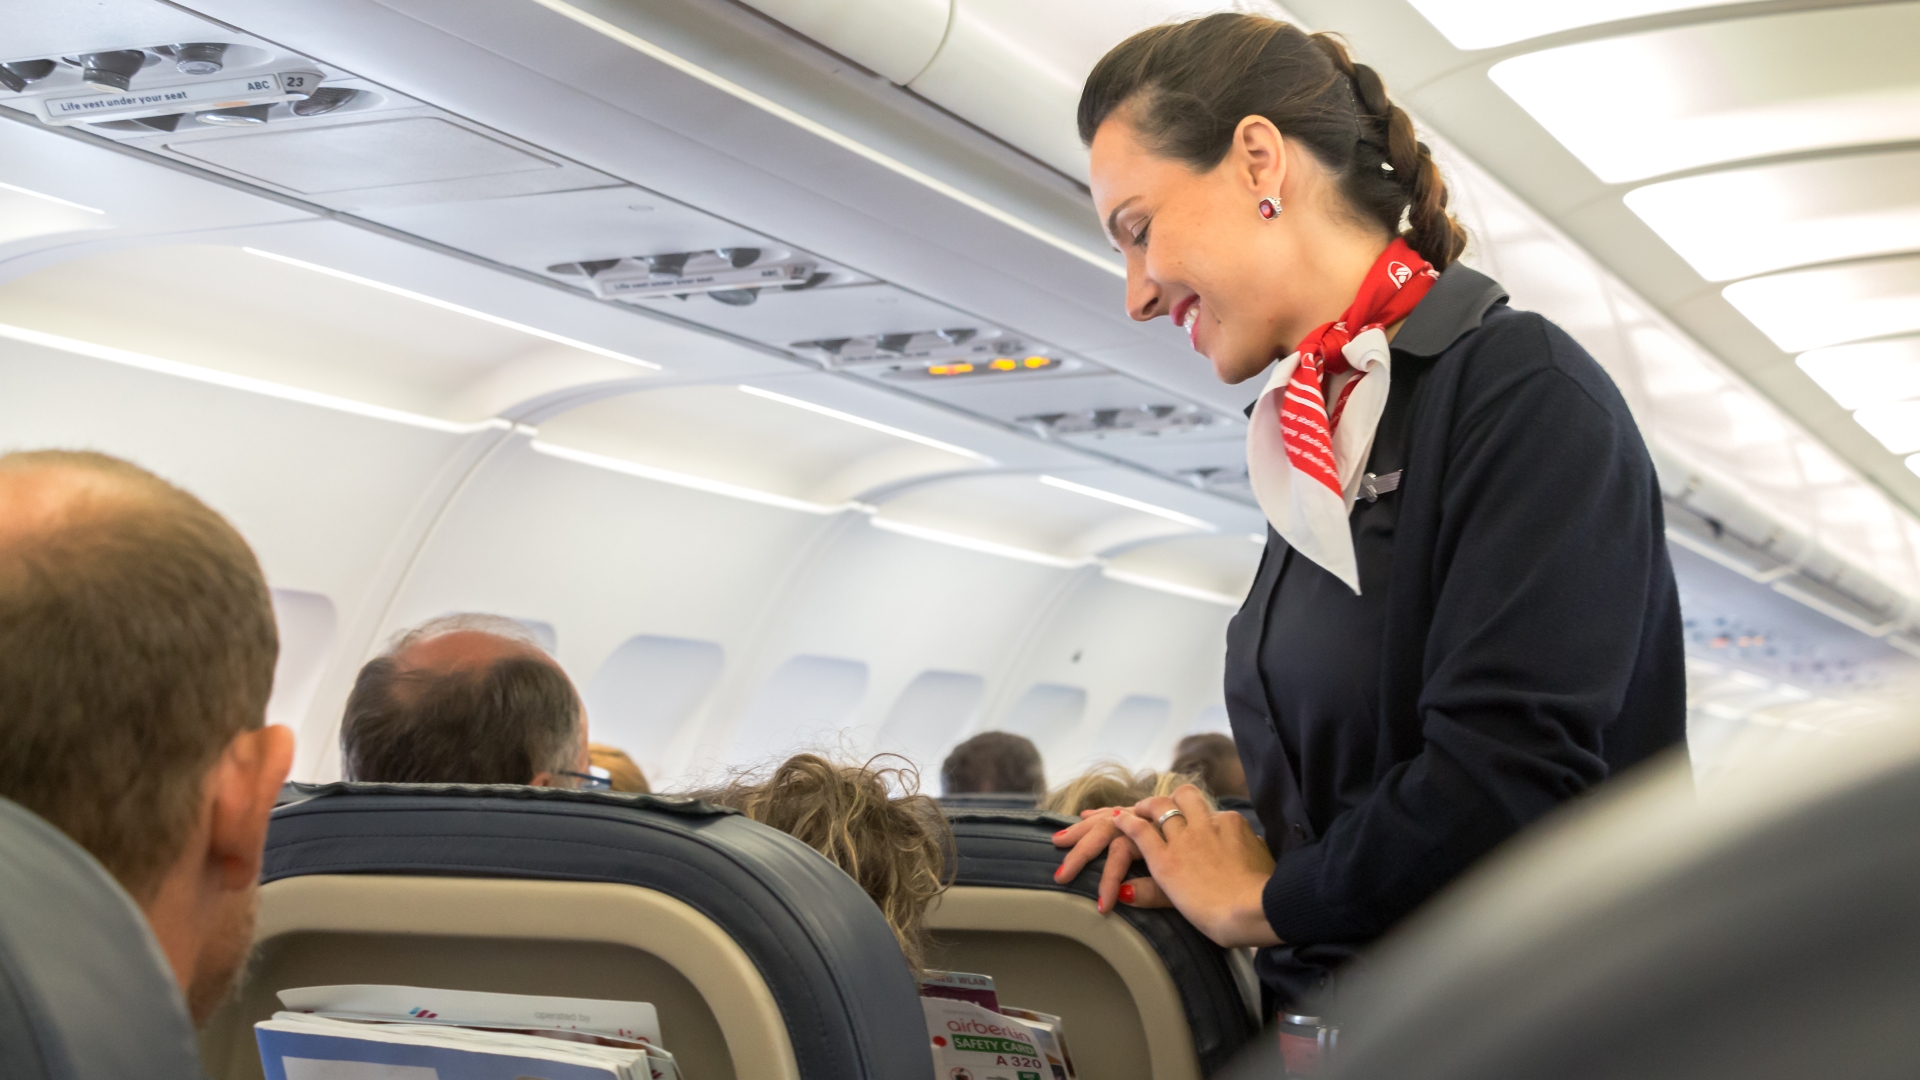 I’m a flight attendant – here is how we get noisy kids to be quiet on the plane